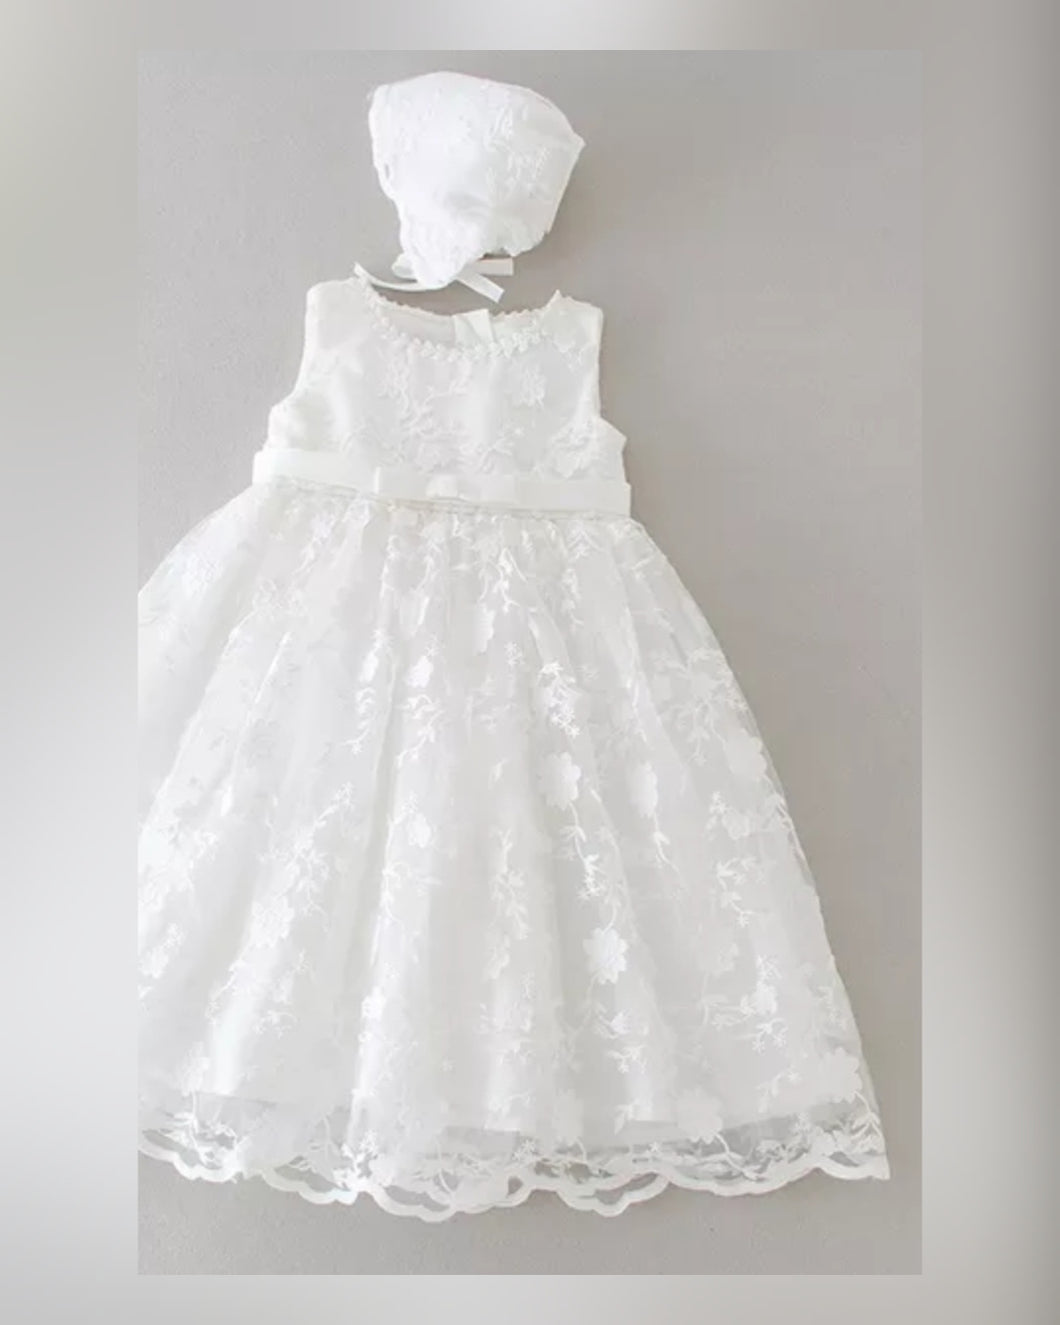 Christening Outfit for Girls